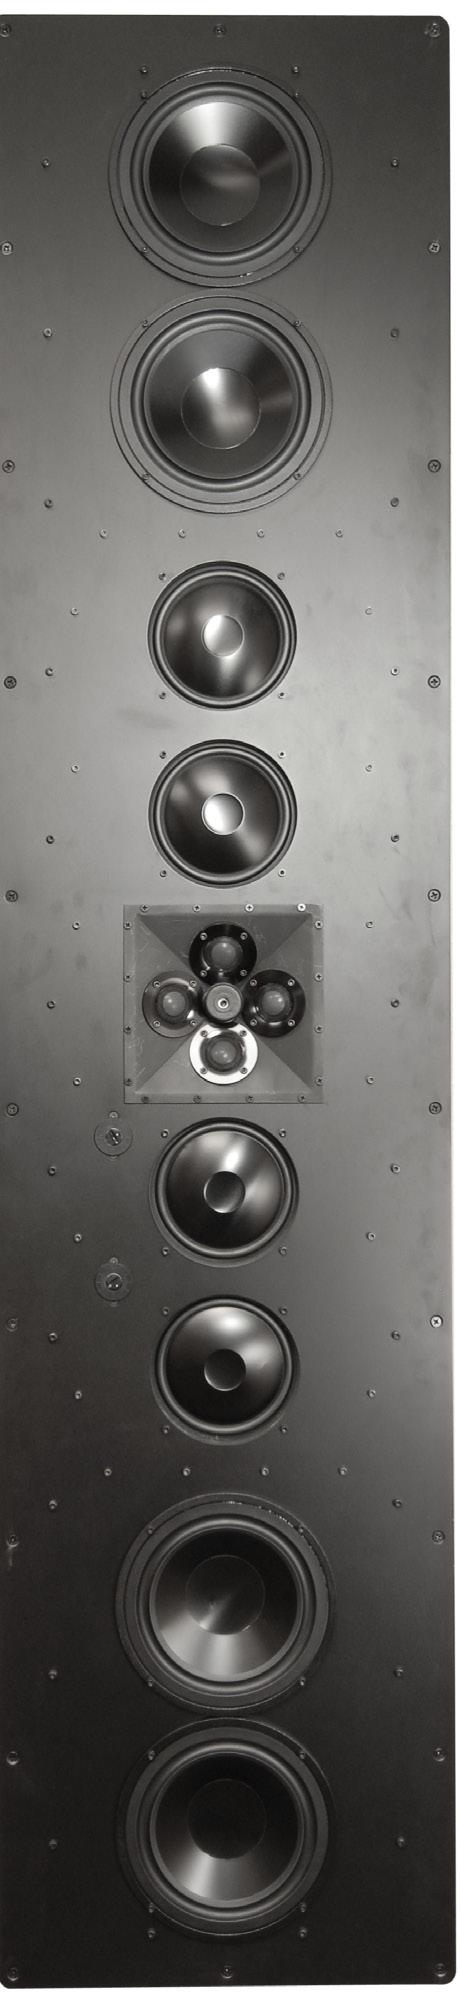 Multi directional Beryllium-copper quad tweeter array provides a seamless precise soundstage assuring extremely wide coverage of the listening area concerto with uniform